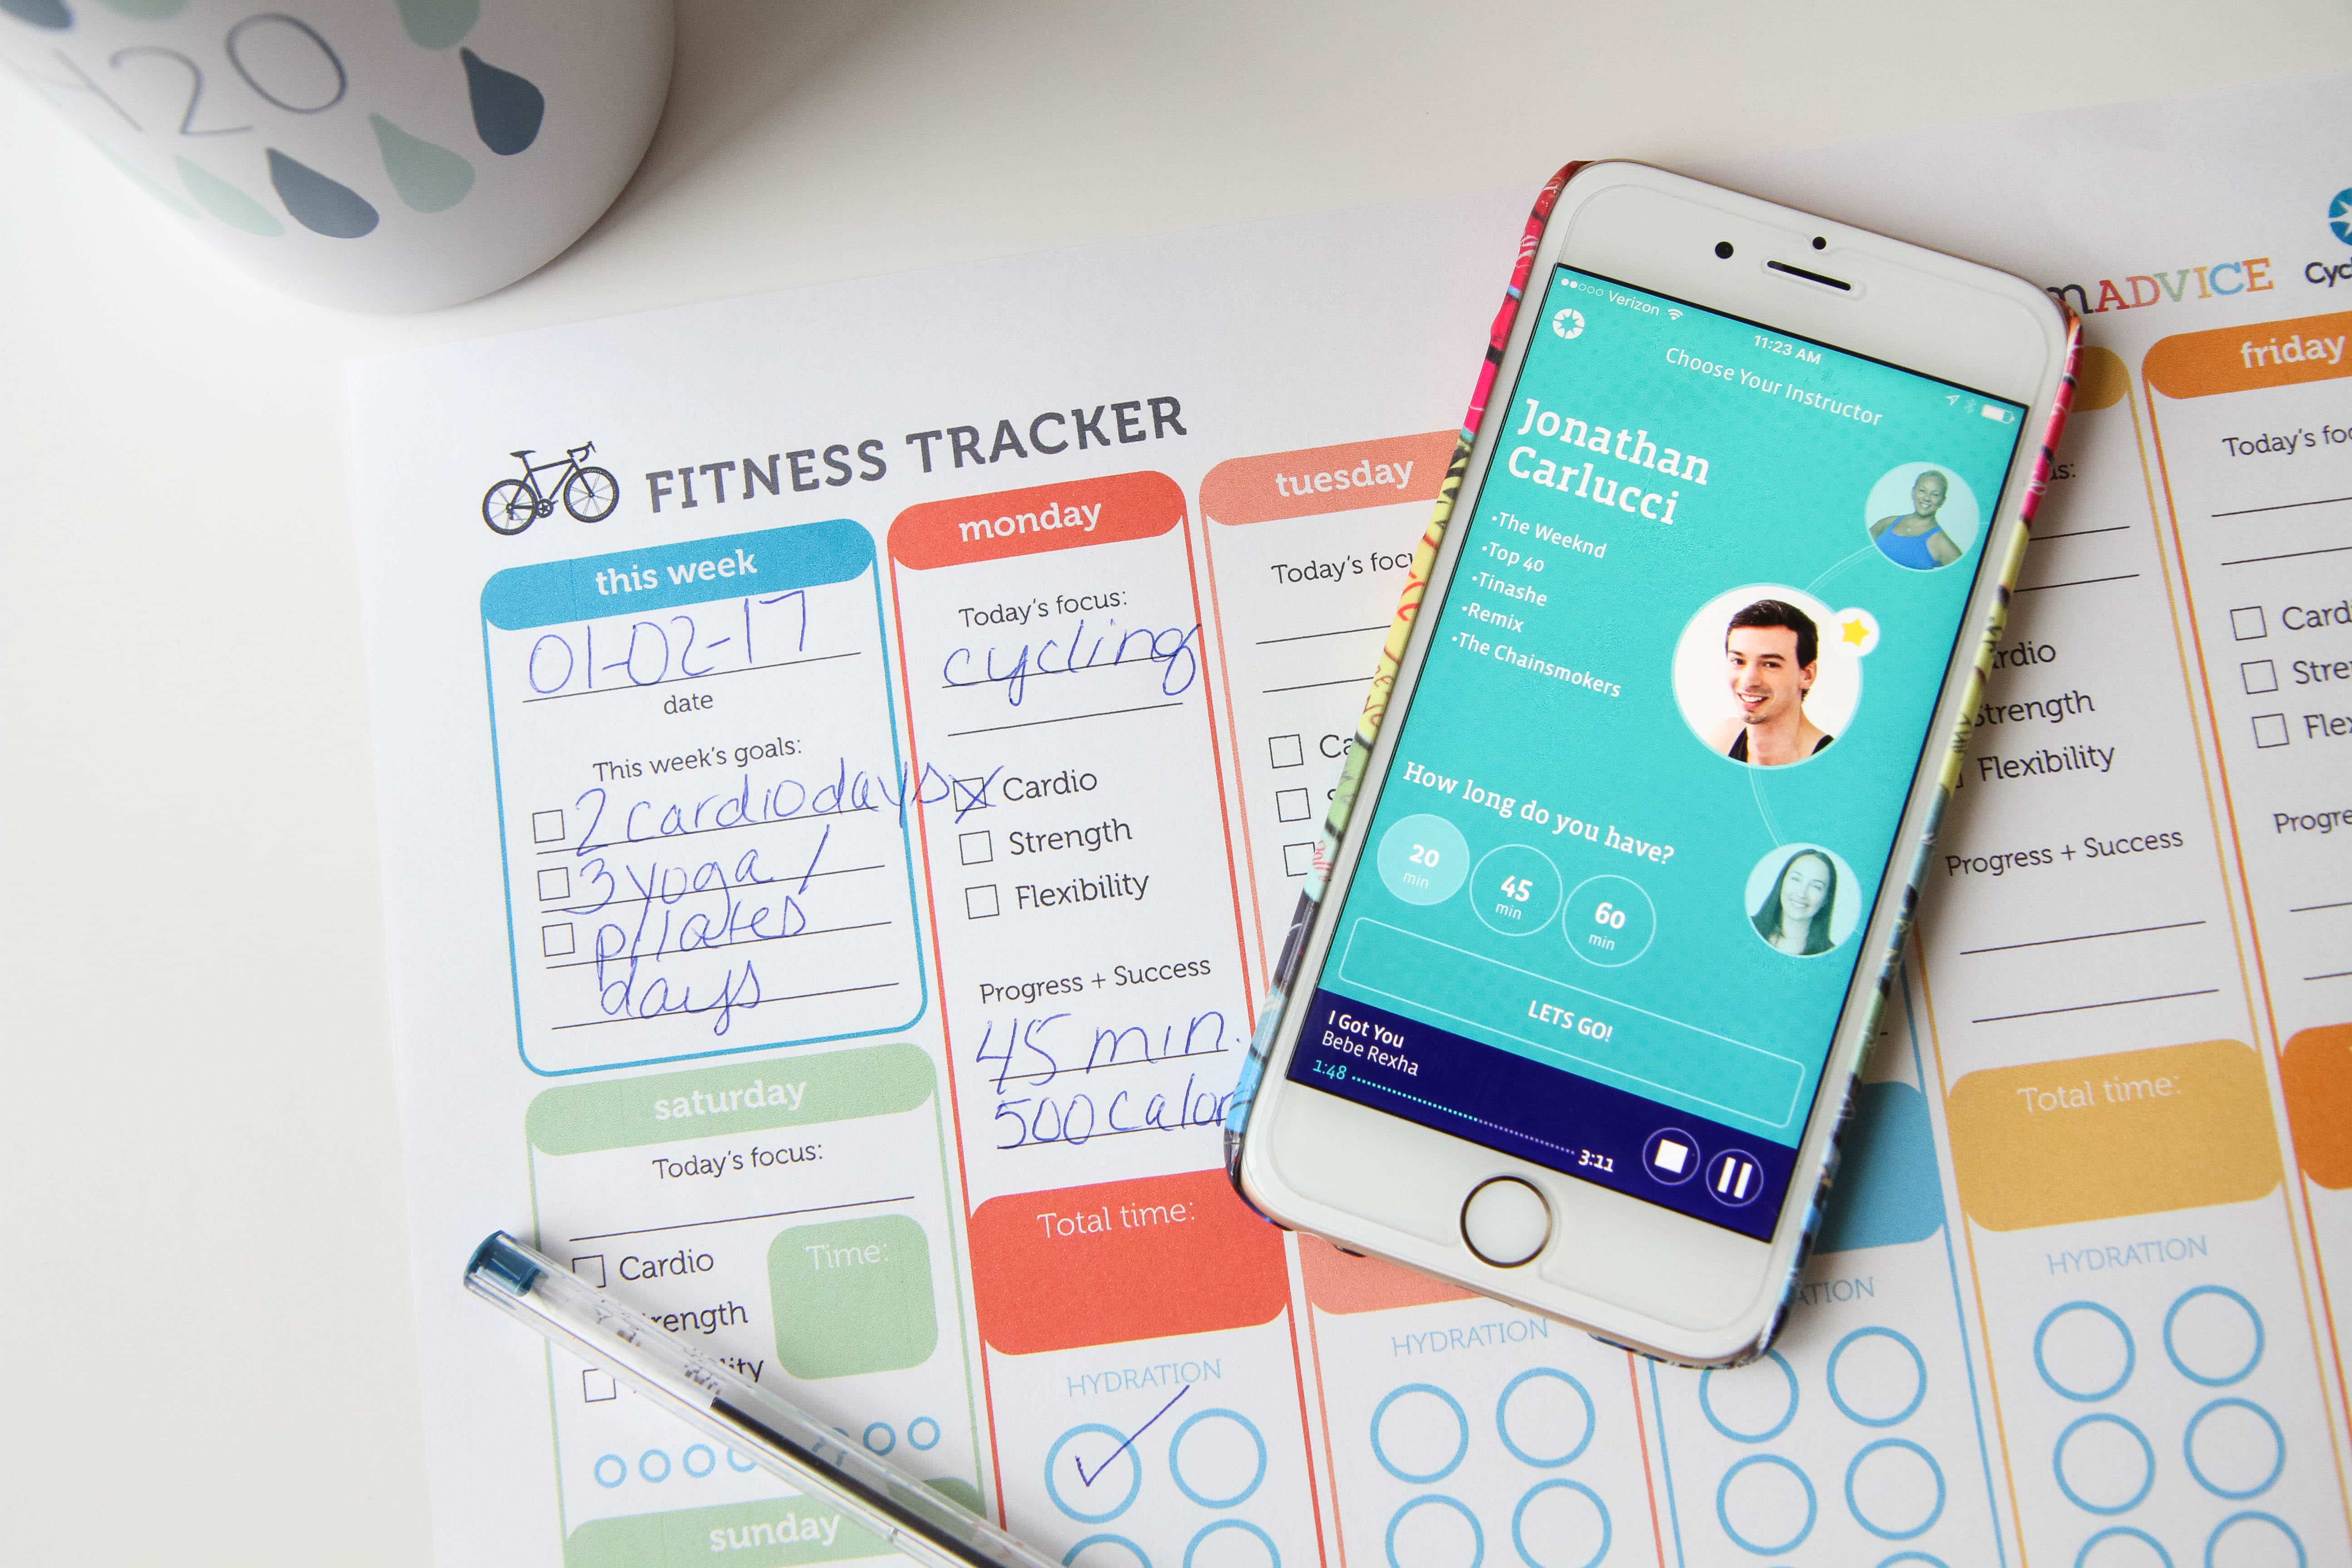 Boutique Workouts At Home (FREE Printable Fitness Tracker)